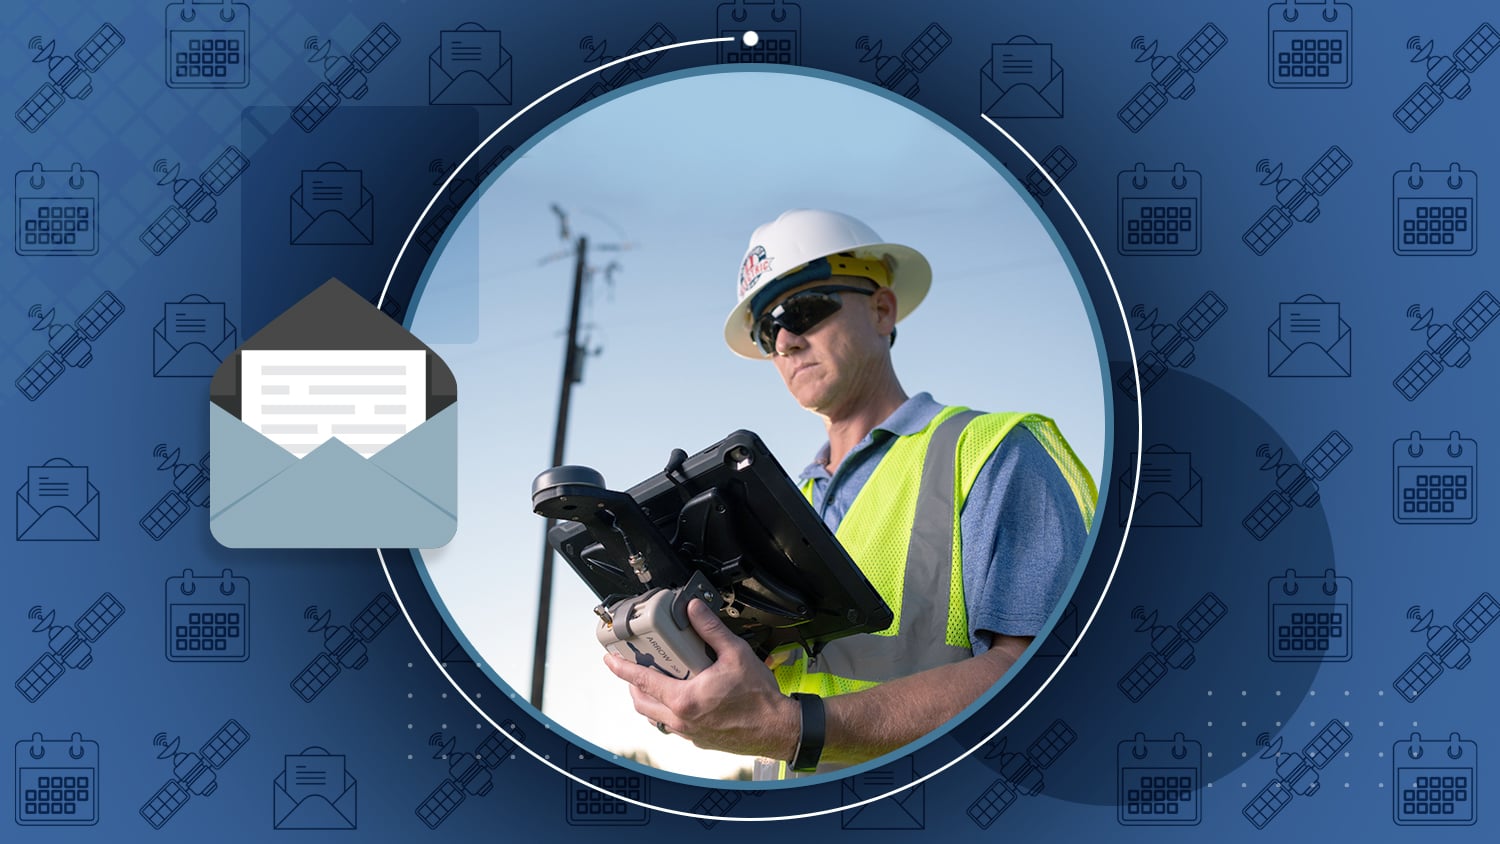 Eos Arrow June 2019 Newsletter- TCEC Helps Customers GPS GNSS GIS